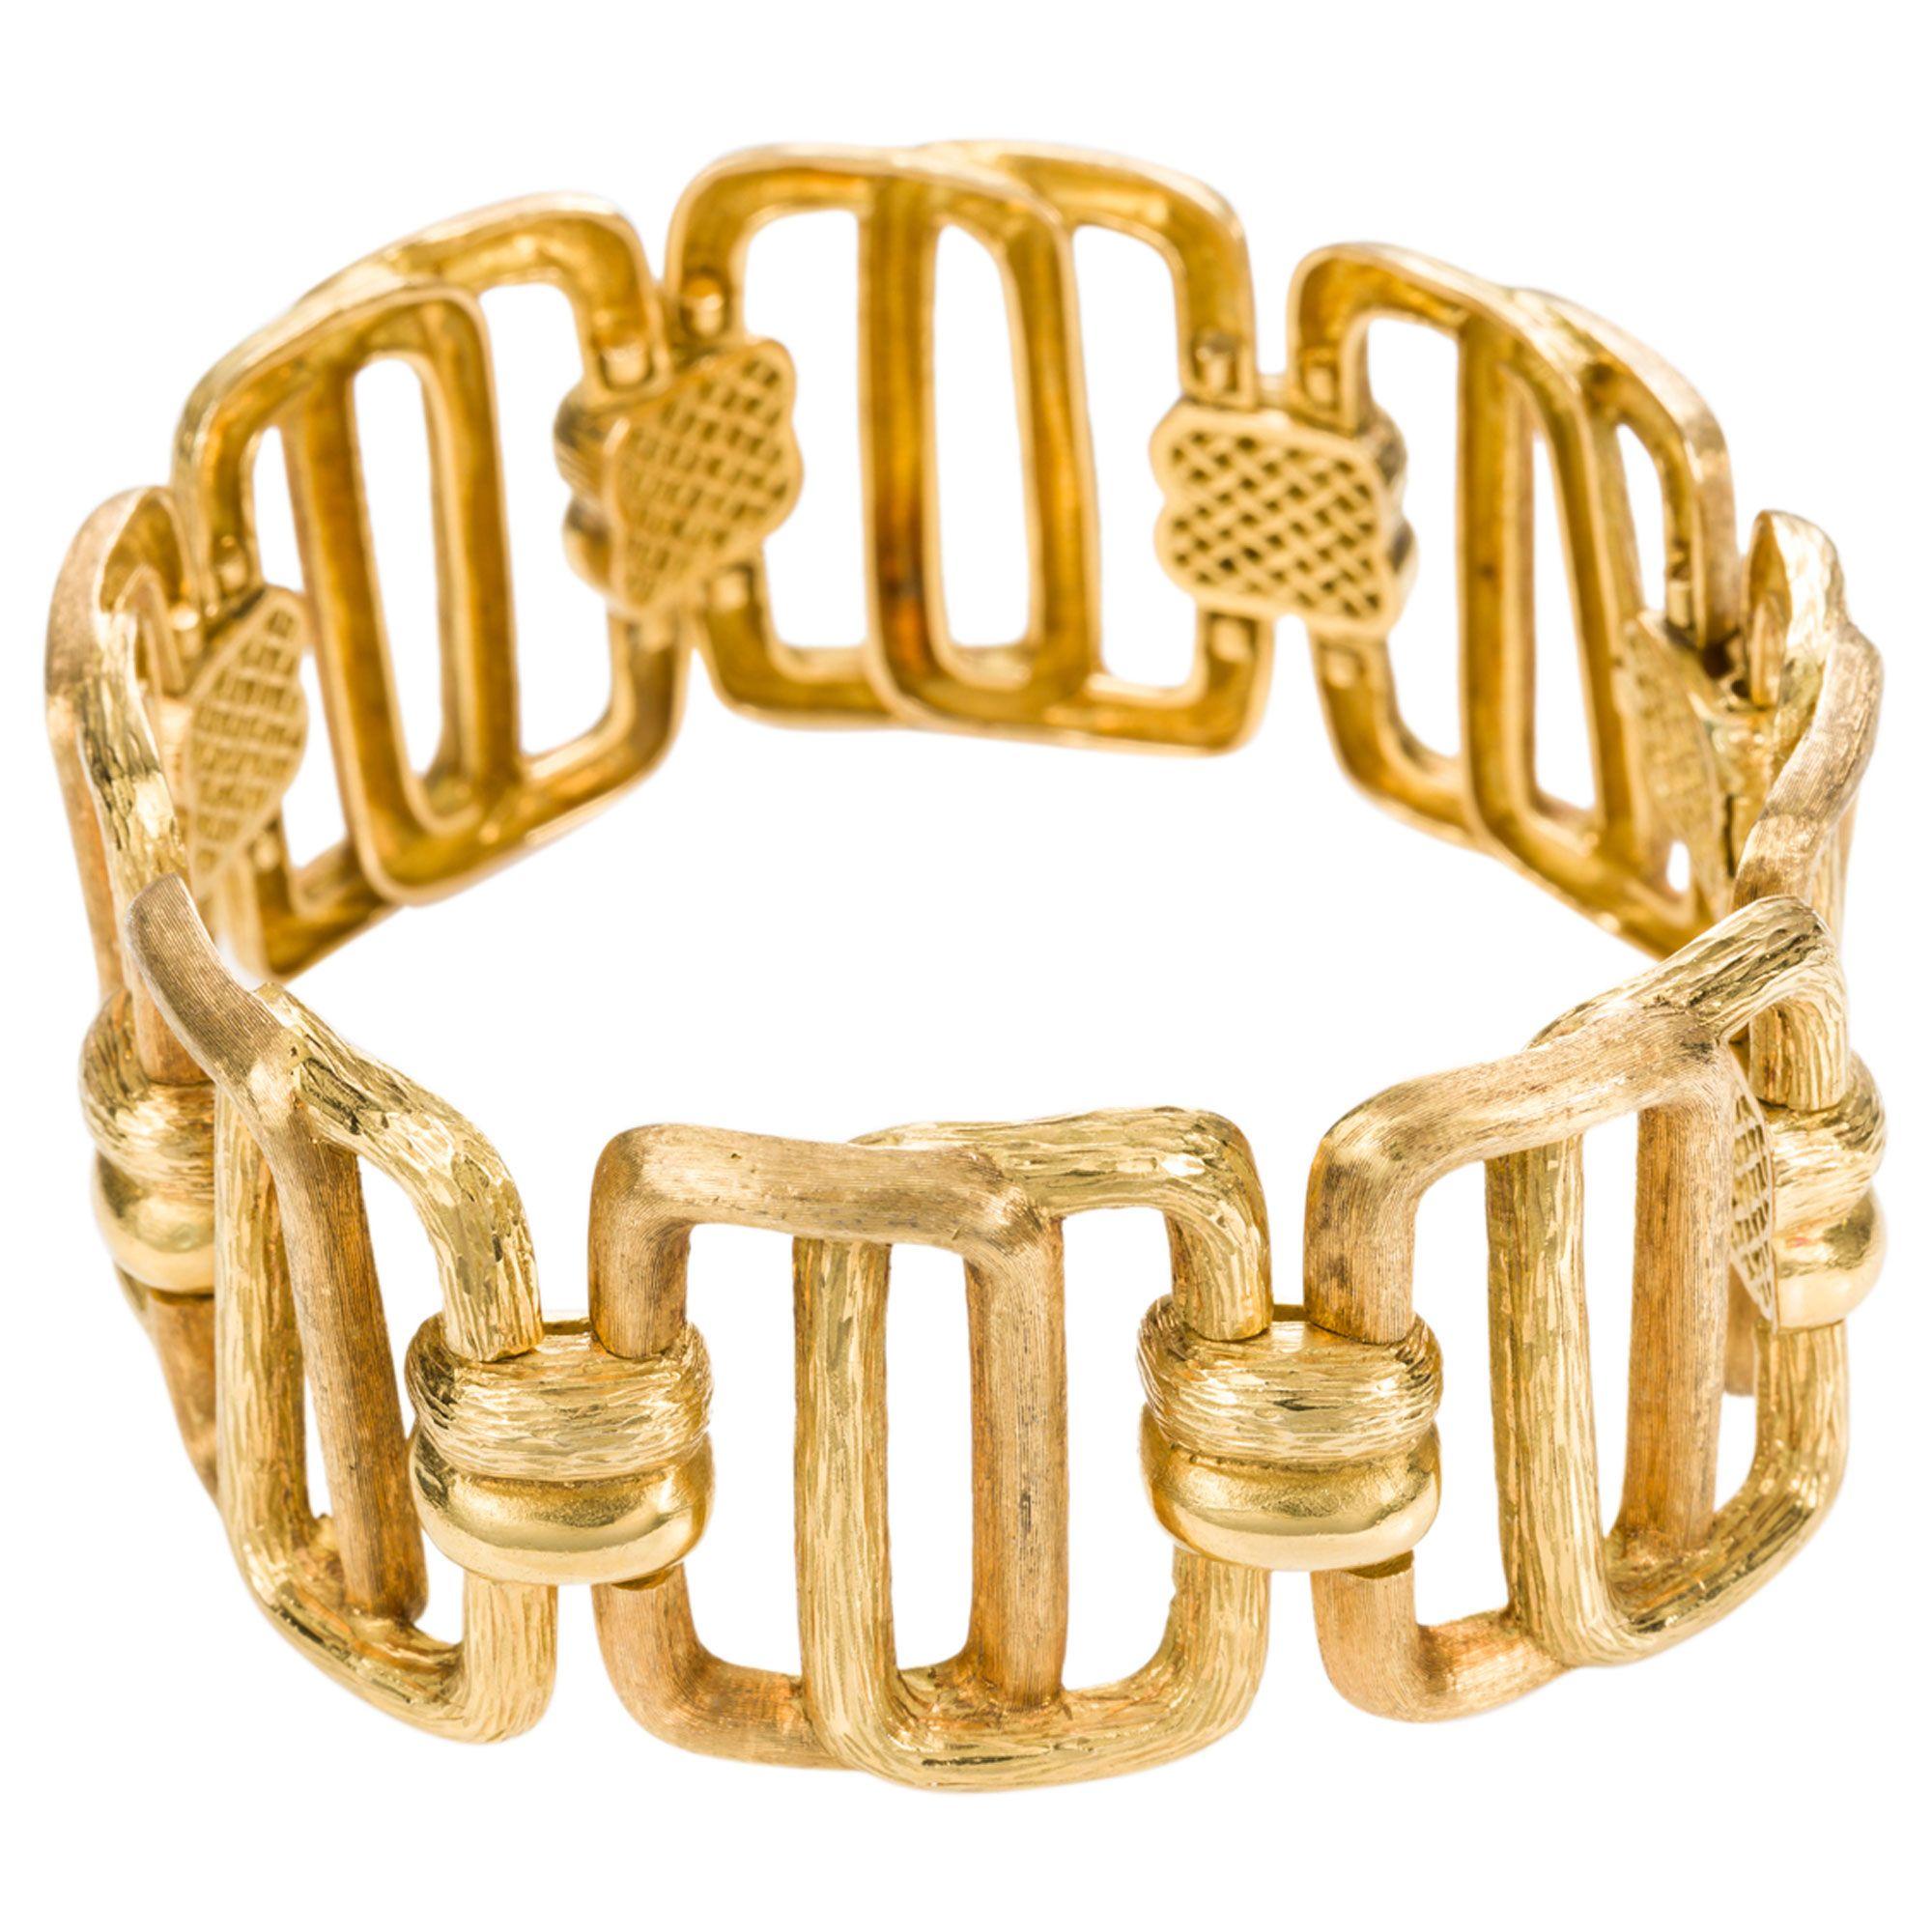 Organic and textural, this 18k yellow gold Hungarian link bracelet will have heads turning. Superbly crafted by an artist, being able to achieve this amazing texture on gold shows true craftsmanship. Designed as a series of eight double links joined